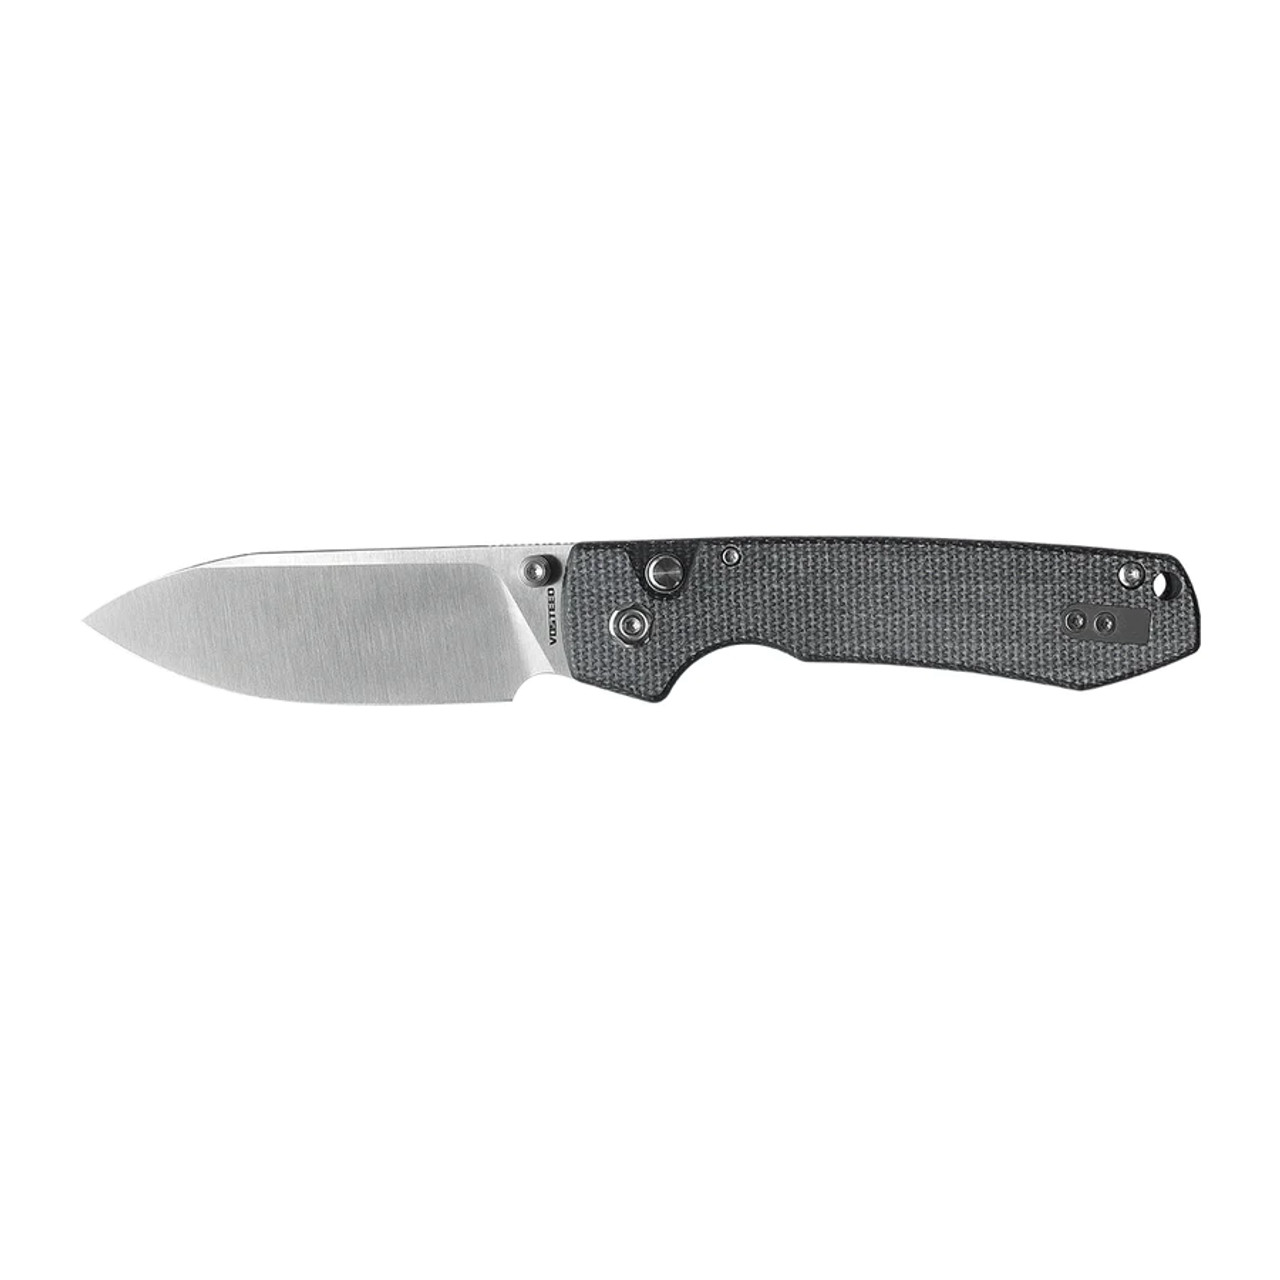 product image for Vosteed Racoon RC 3 SVM 2 Black Micarta 14C28N Plain Edge Folding Knife